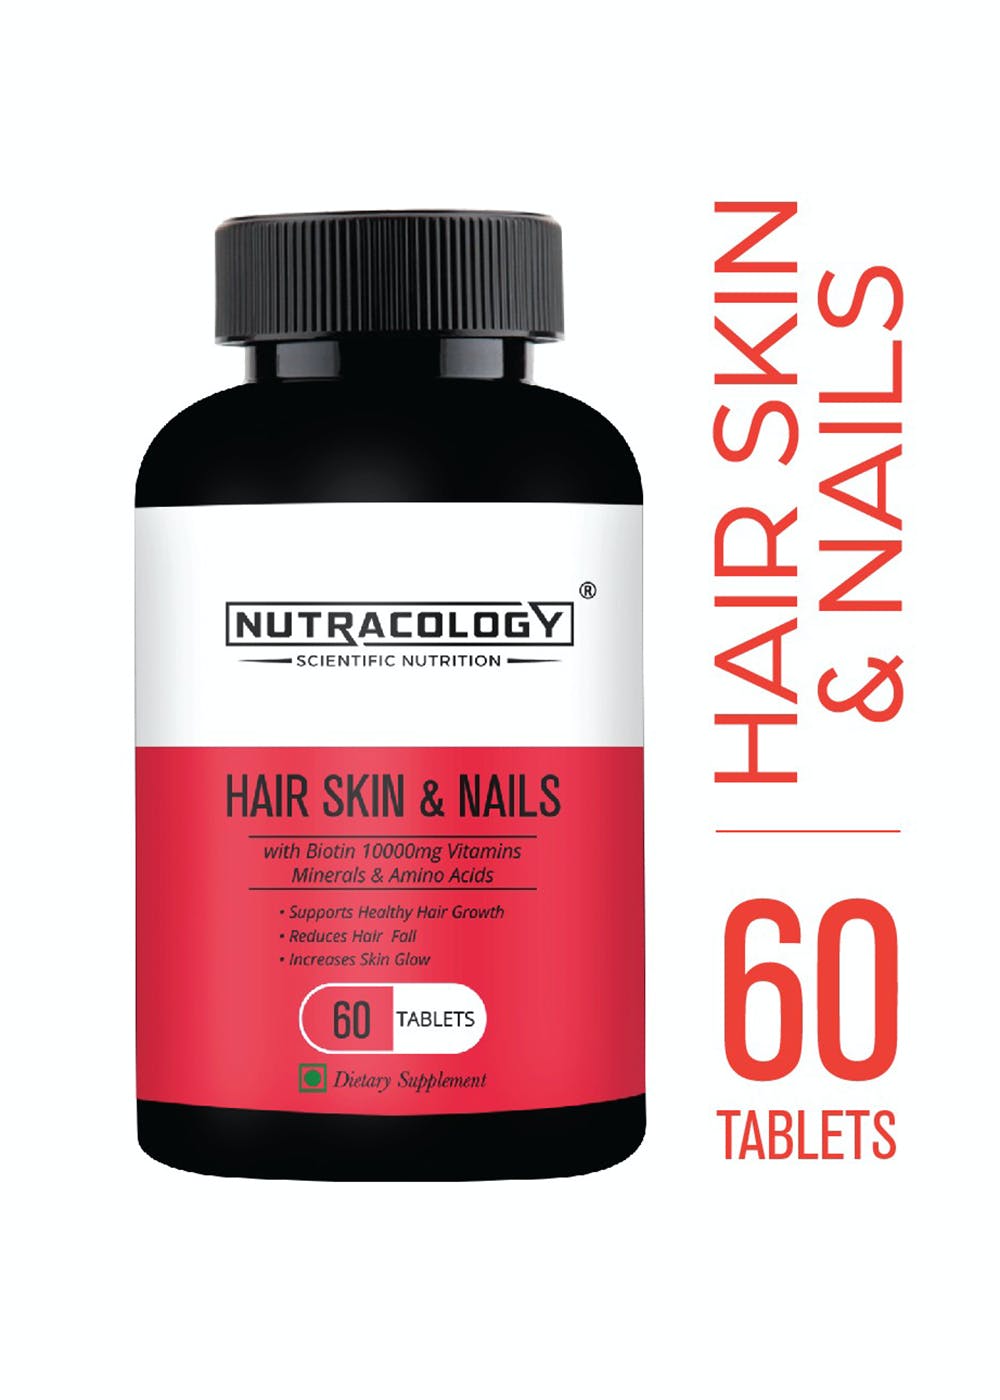 Get Hair, Skin & Nails Tablet For Hair Growth & Glowing Skin - 60 Tablets  at ₹ 600 | LBB Shop